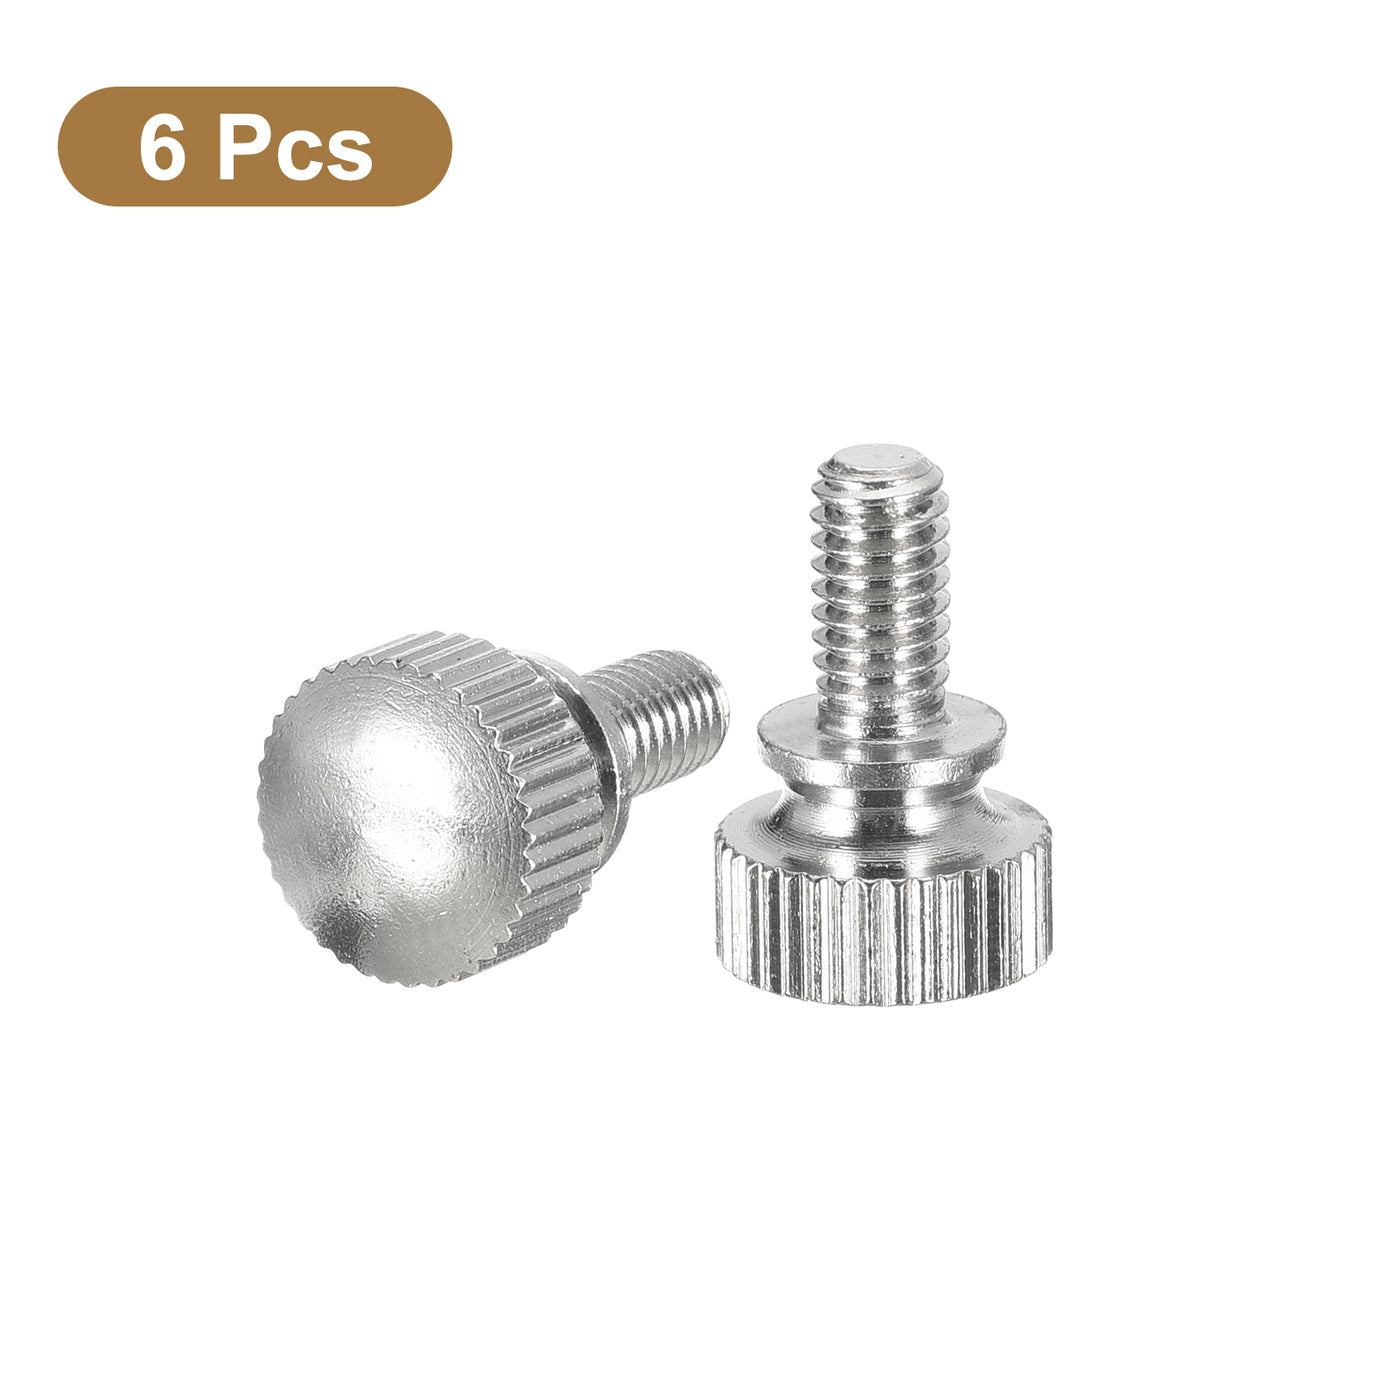 uxcell Uxcell M4x8mm Knurled Thumb Screws, 6pcs Brass Thumb Screws with Shoulder, Silver Tone